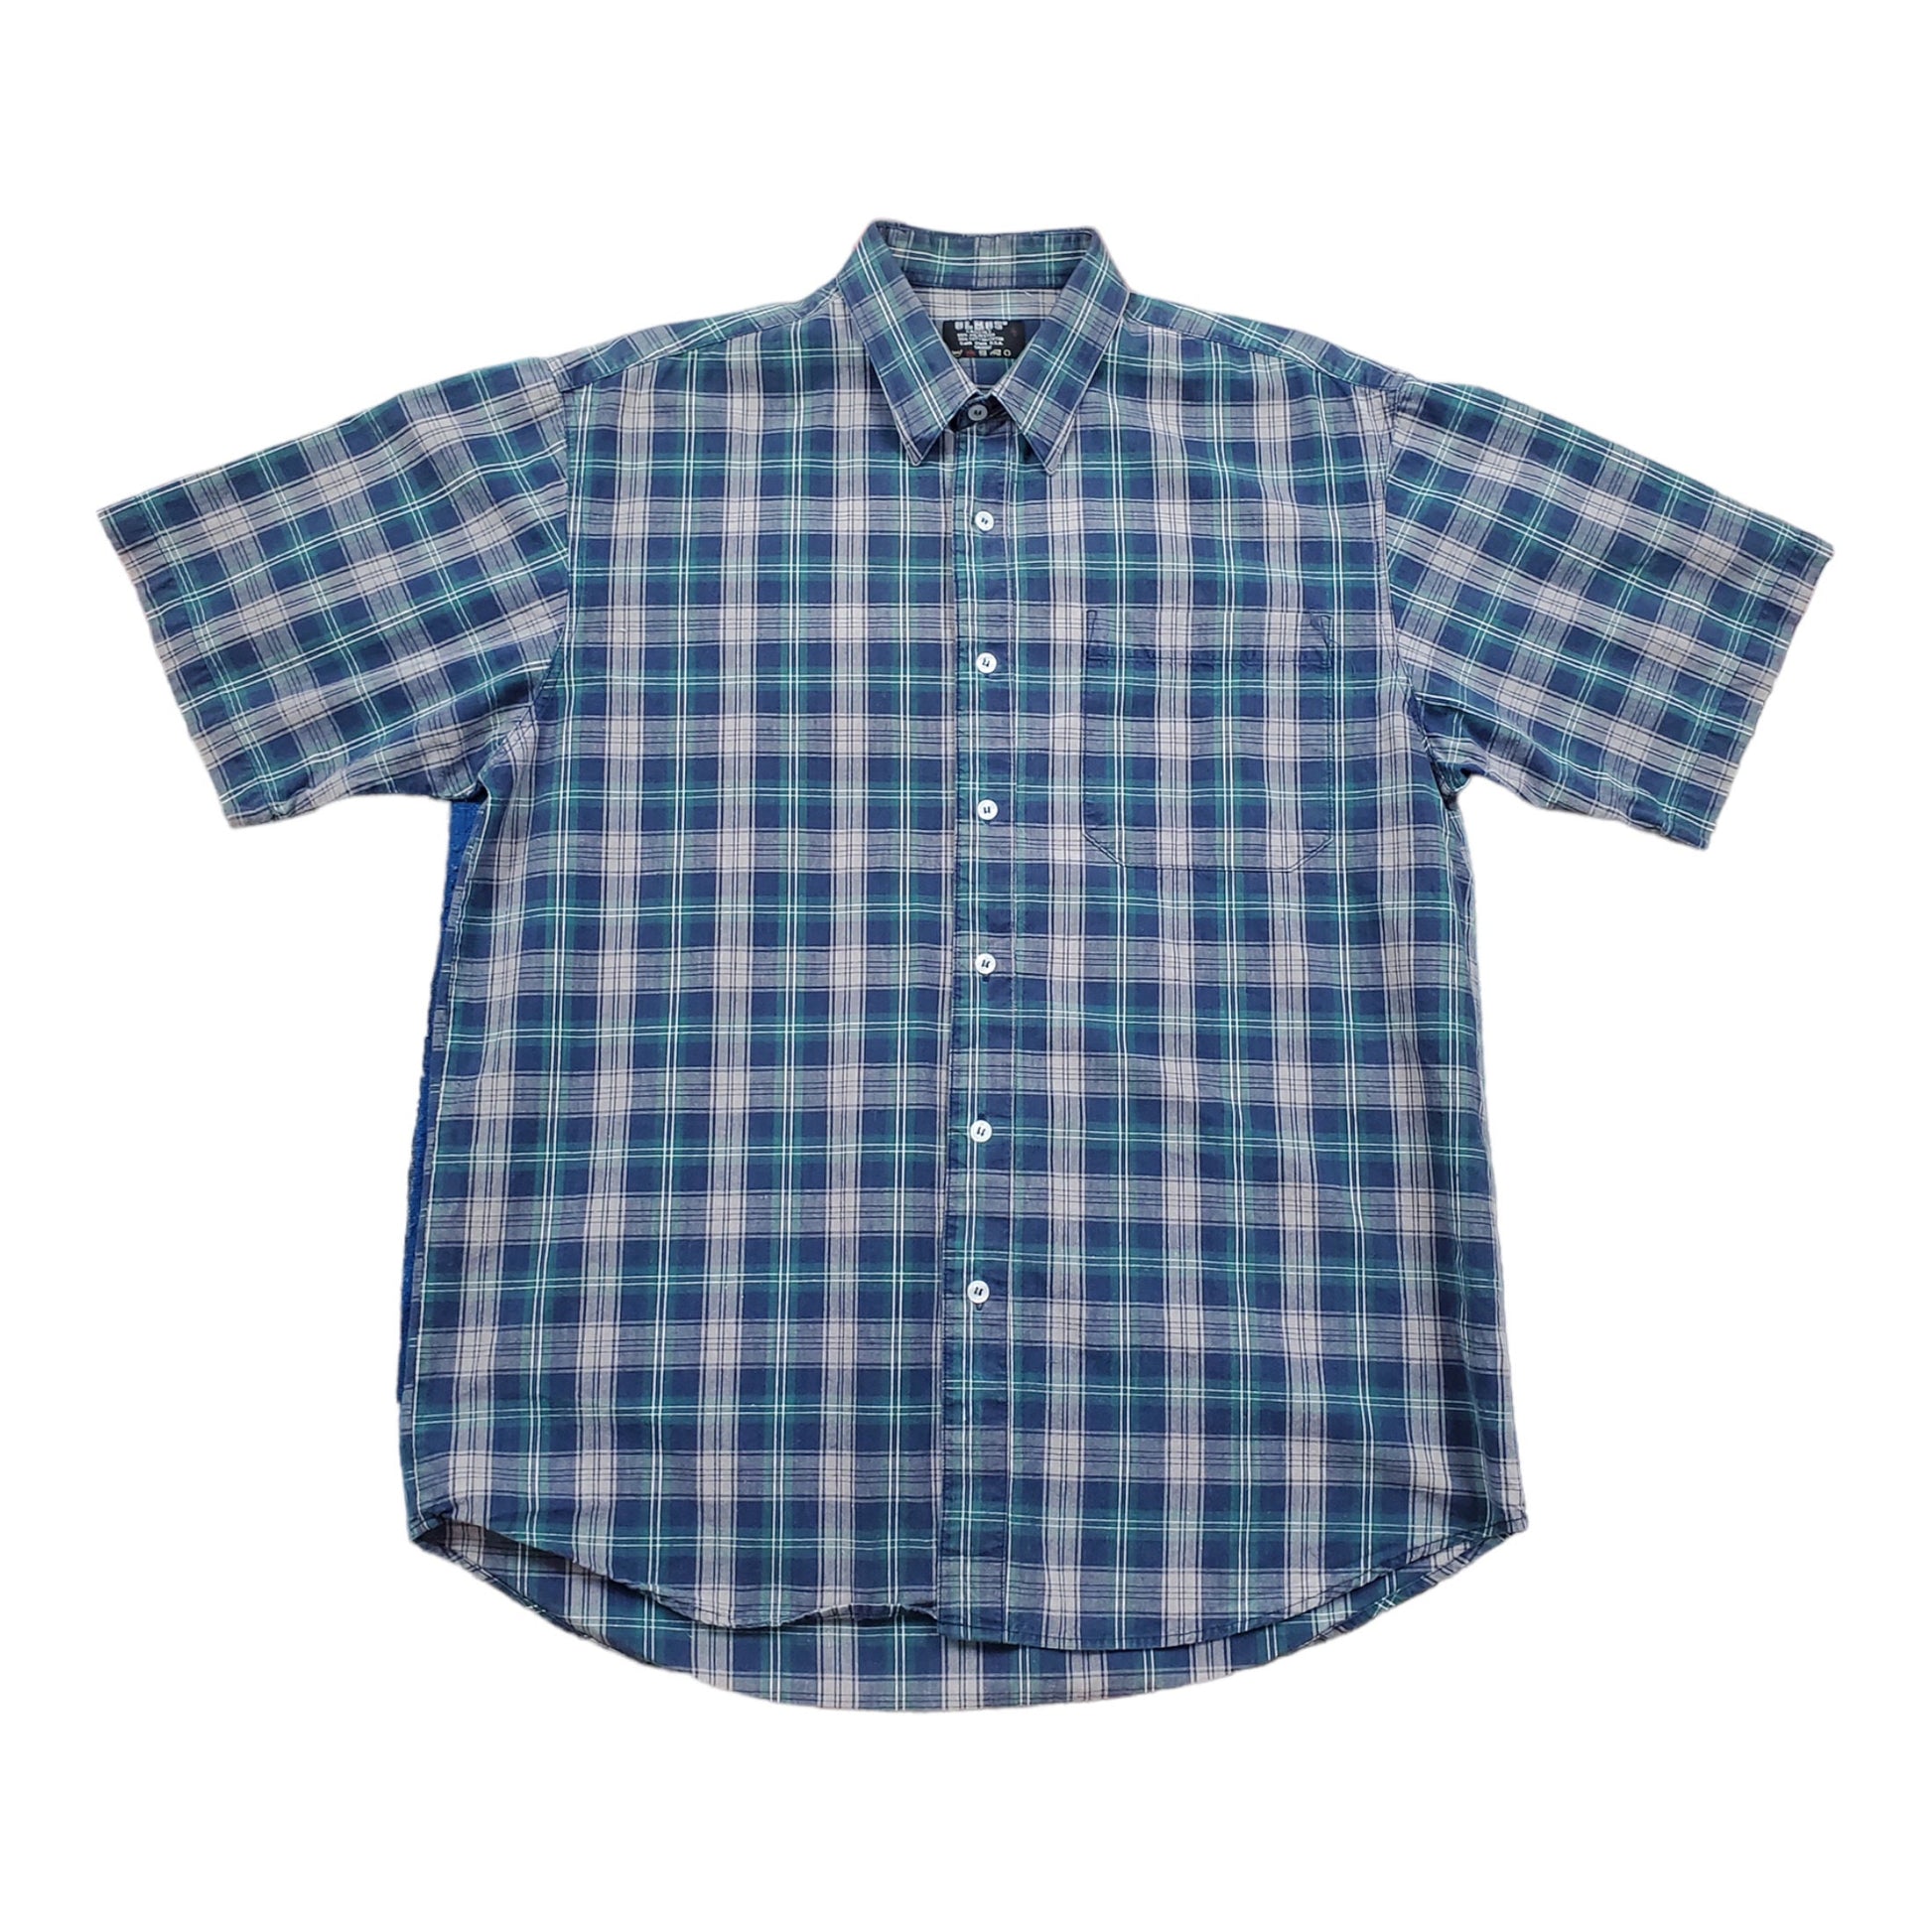 1980s/1990s Olmos Plaid Shortsleeve Shirt Made in Canada Size L/XL